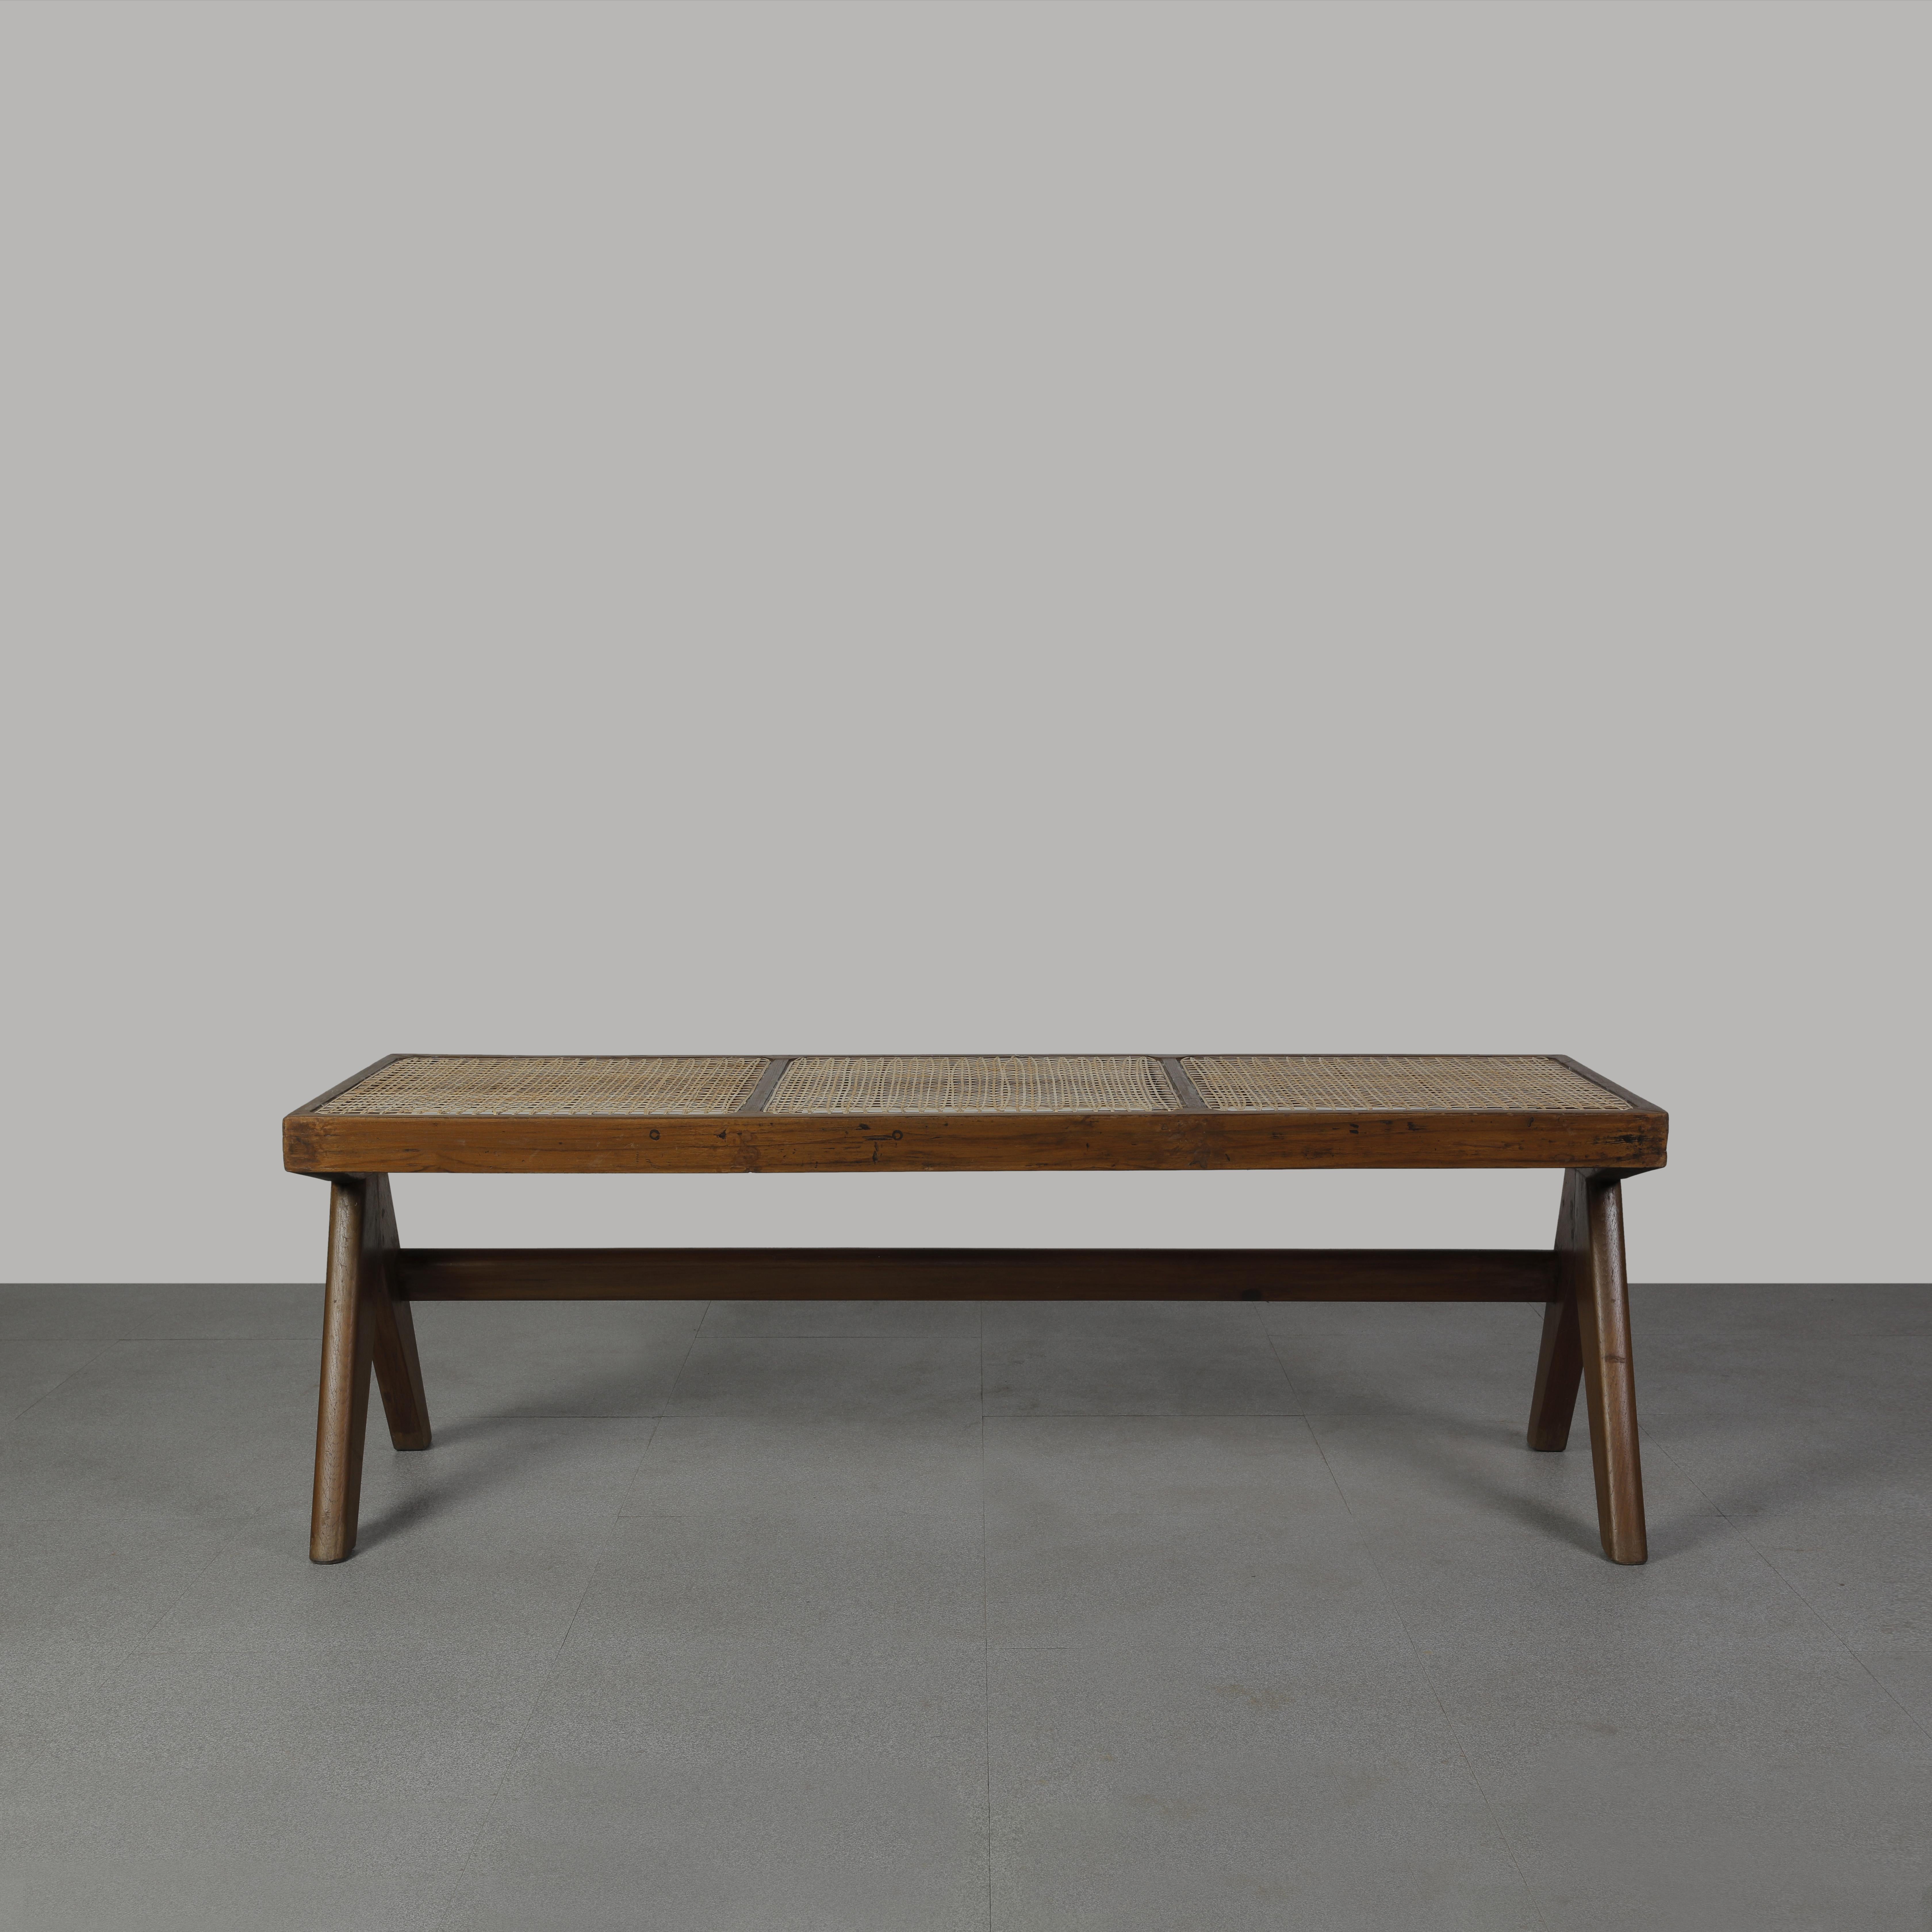 Mid-20th Century Pierre Jeanneret PJ-SI-33-C Cane Bench / Authentic Mid-Century Modern For Sale